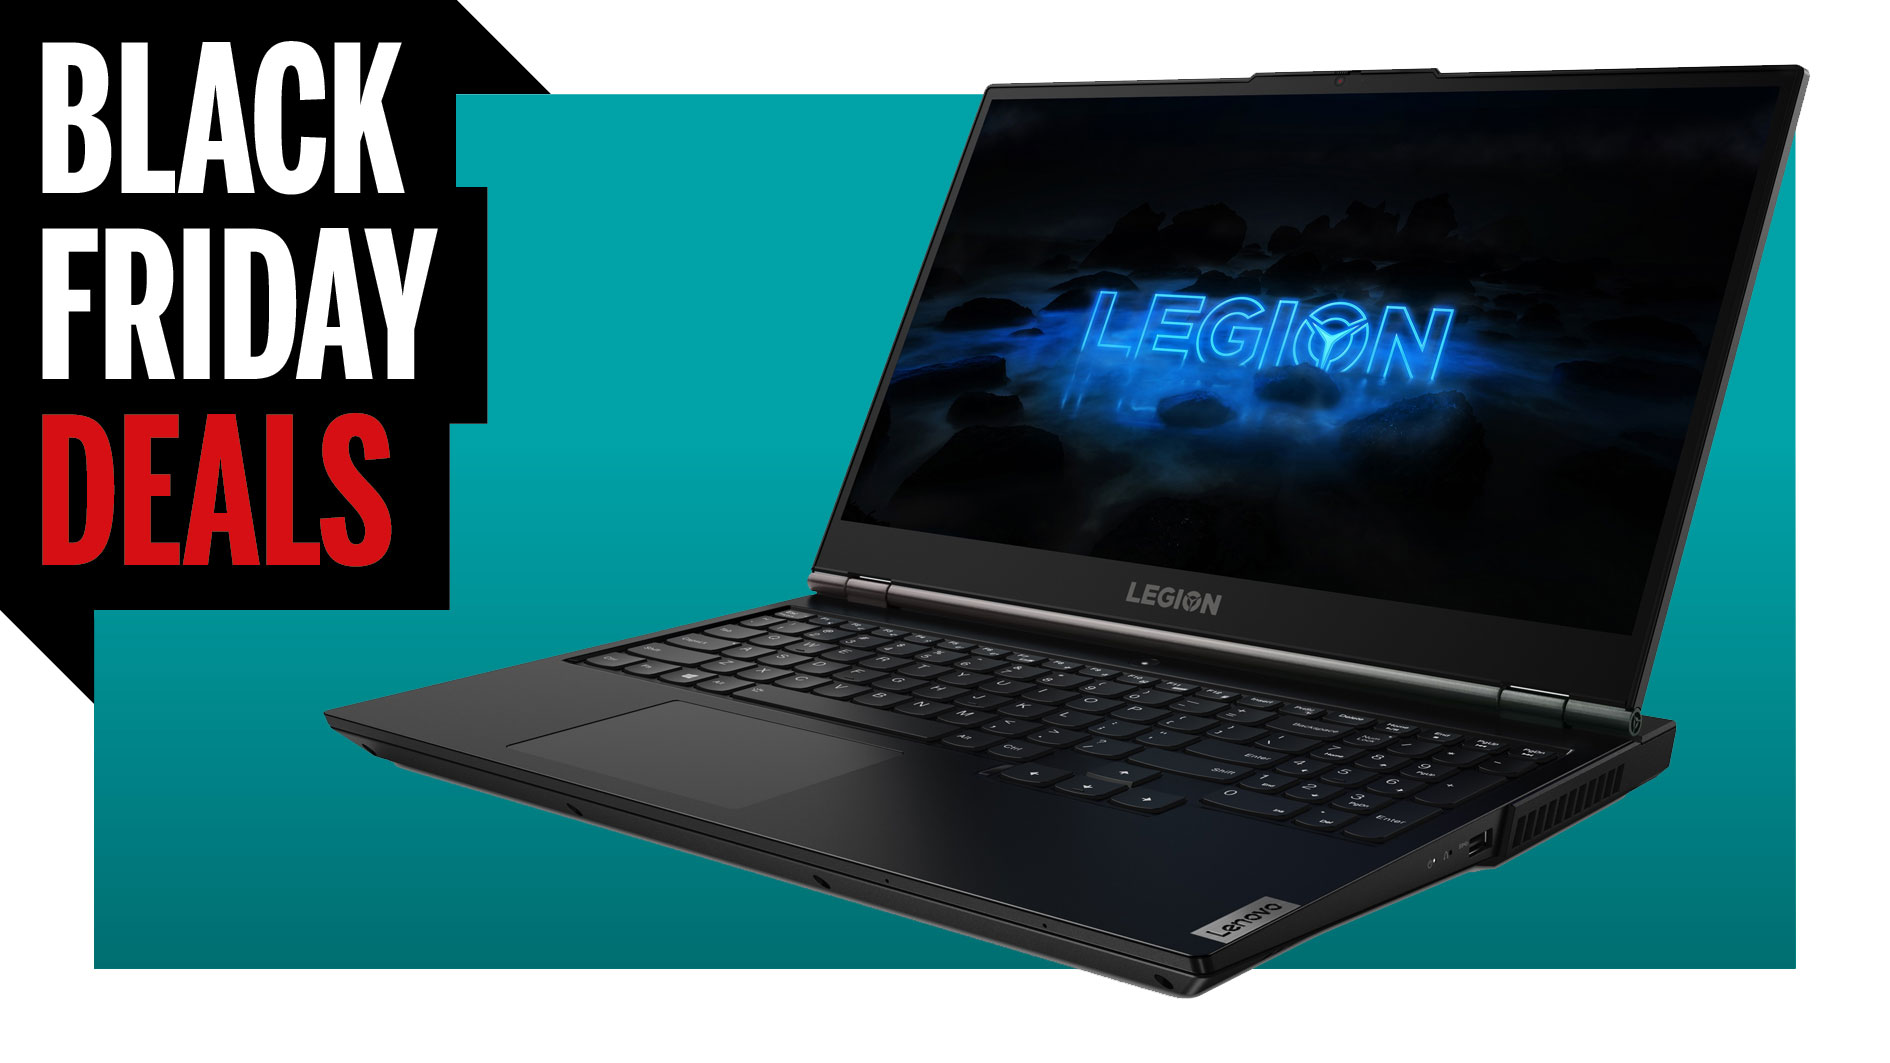  This gaming laptop with a 240Hz display and RTX 2060 is only $999 for Black Friday 